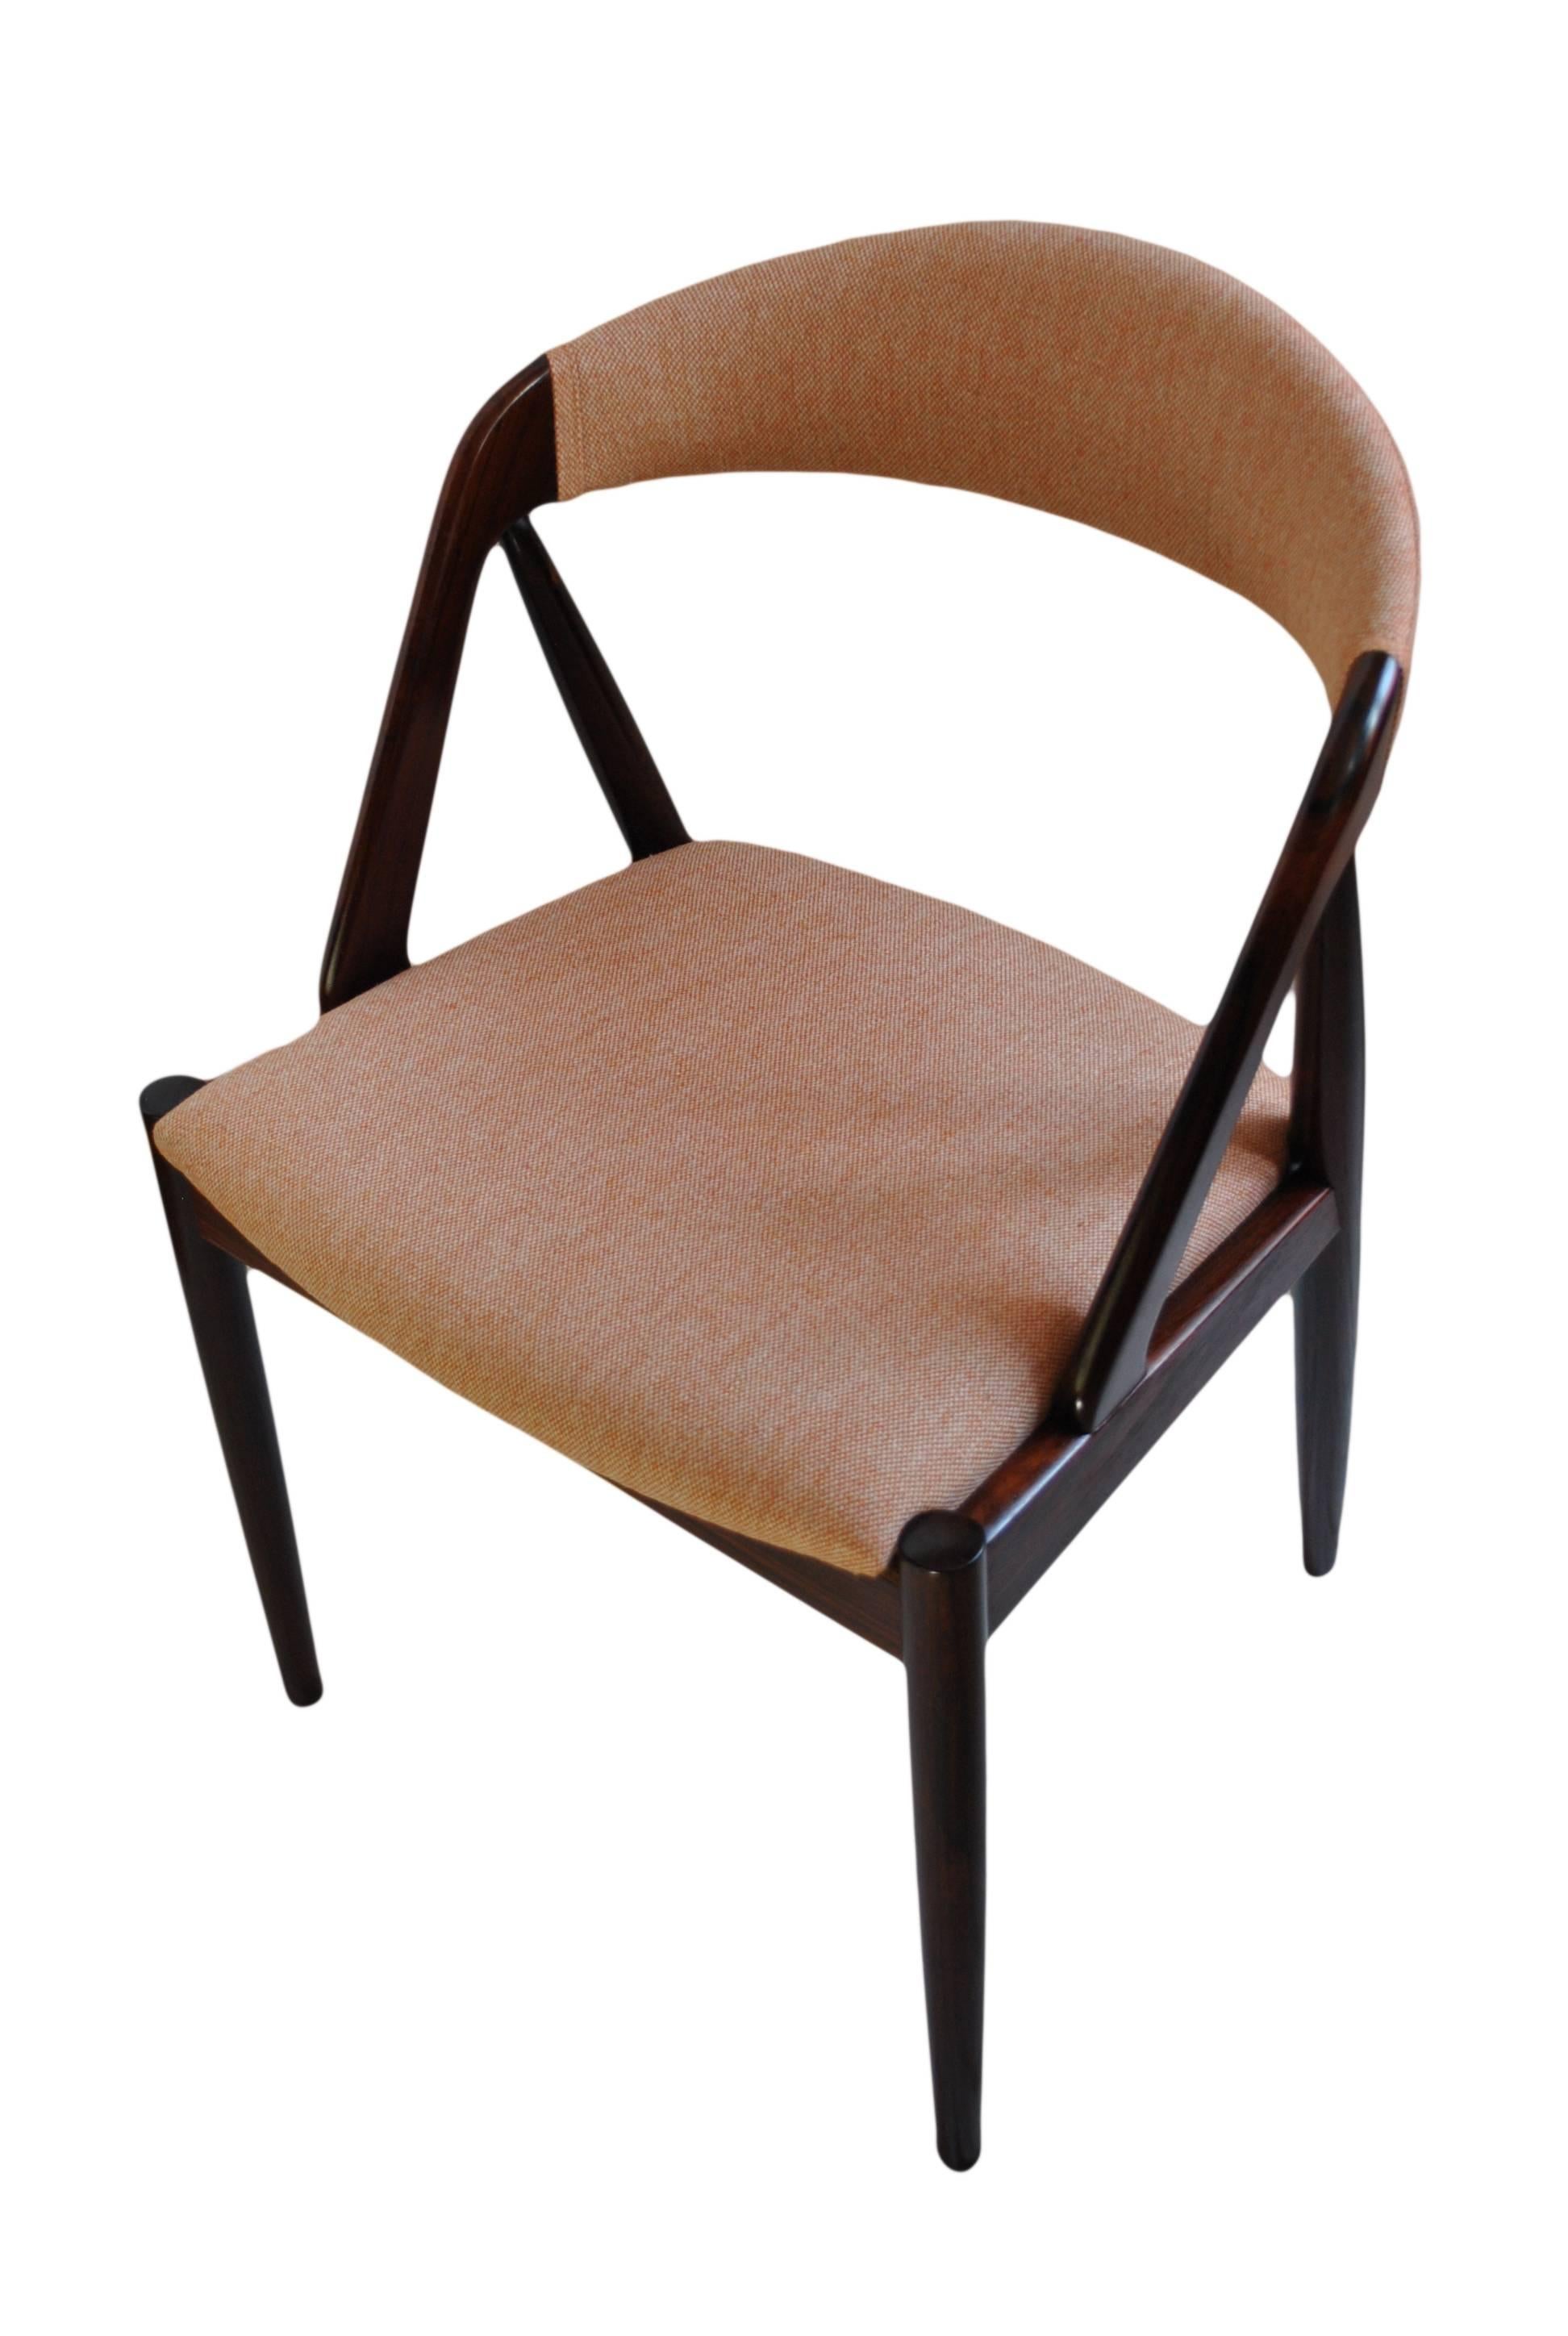 Mid-Century Modern Kai Kristiansen Dining Chairs, Refurbished and reupholstered.